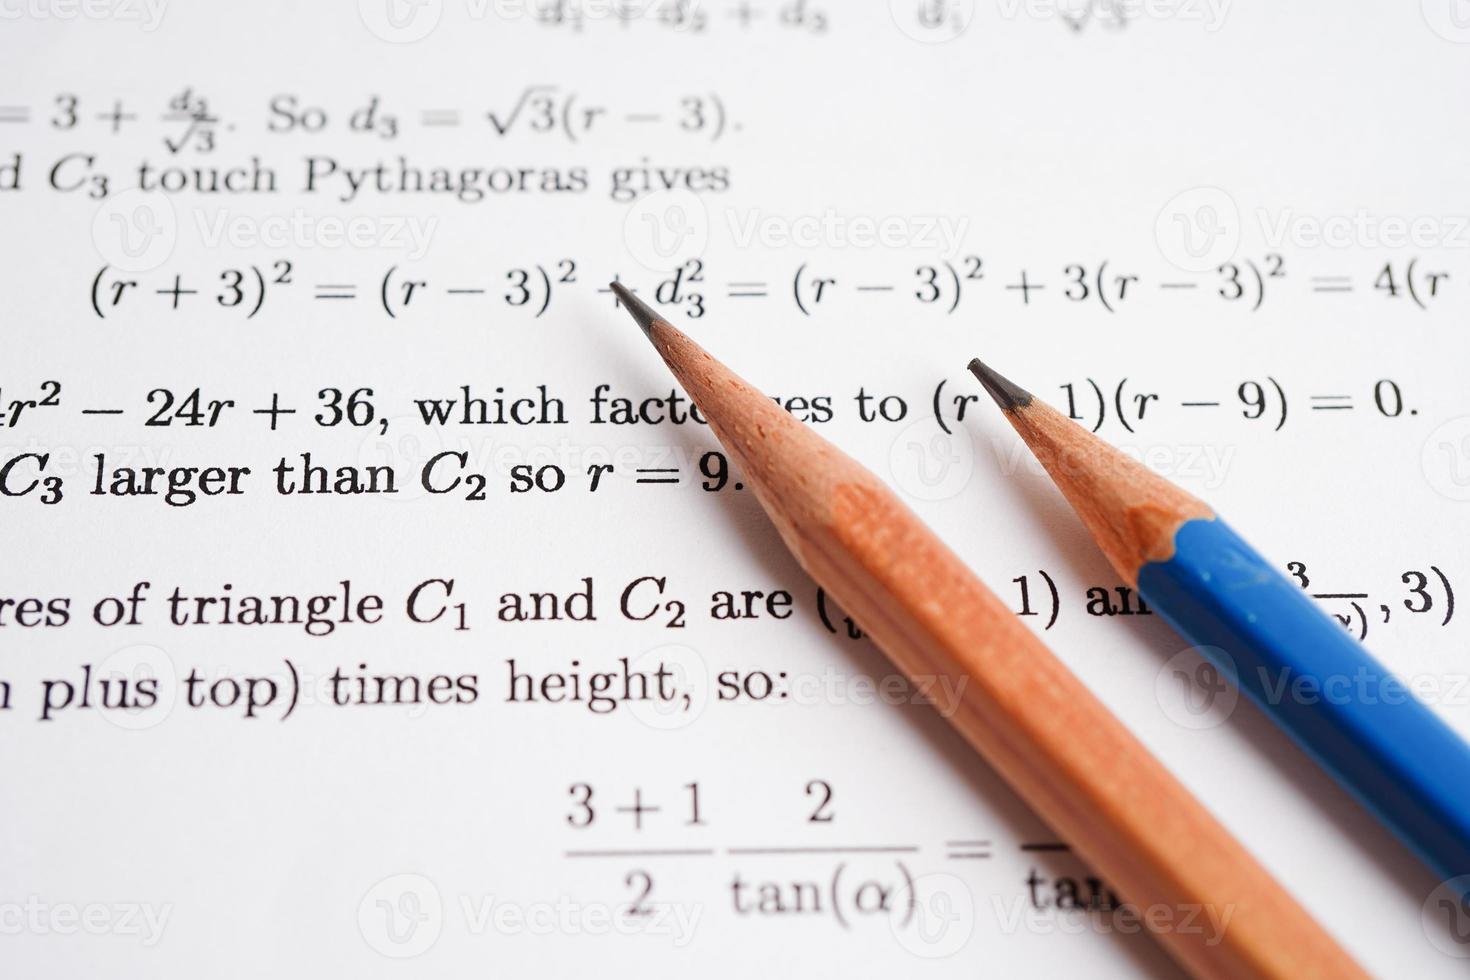 Pencil on mathematic formula exercise test paper in education school. photo